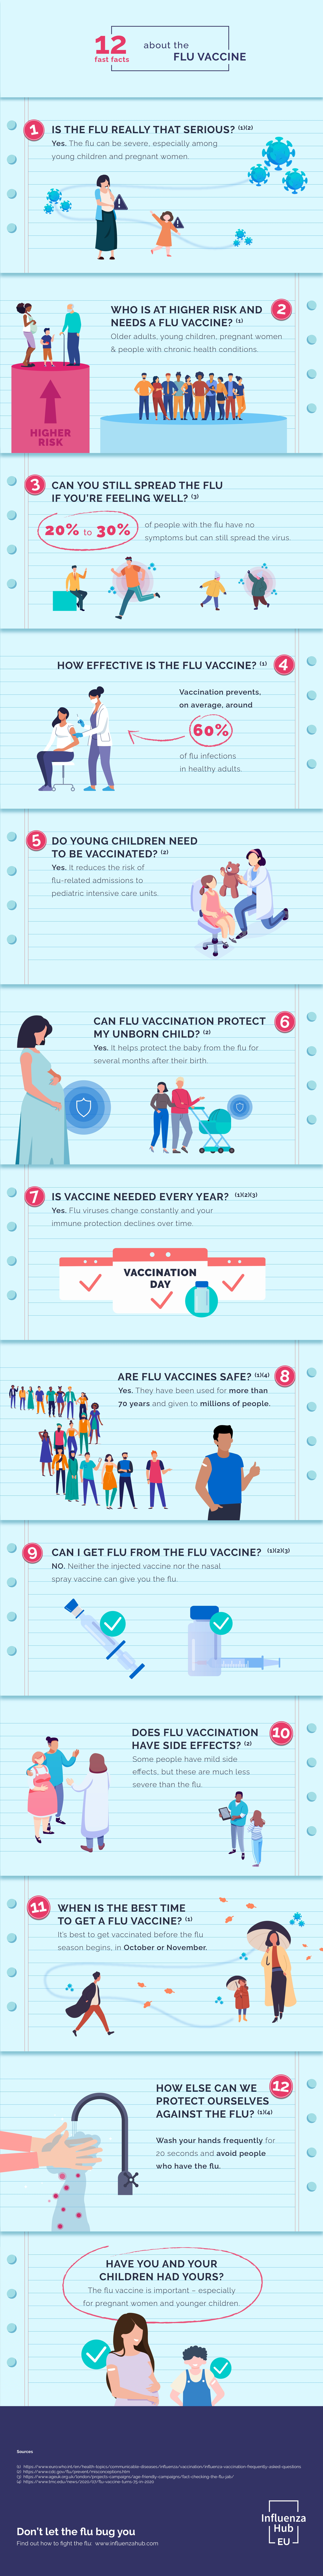 12 fast facts about the flu vaccine